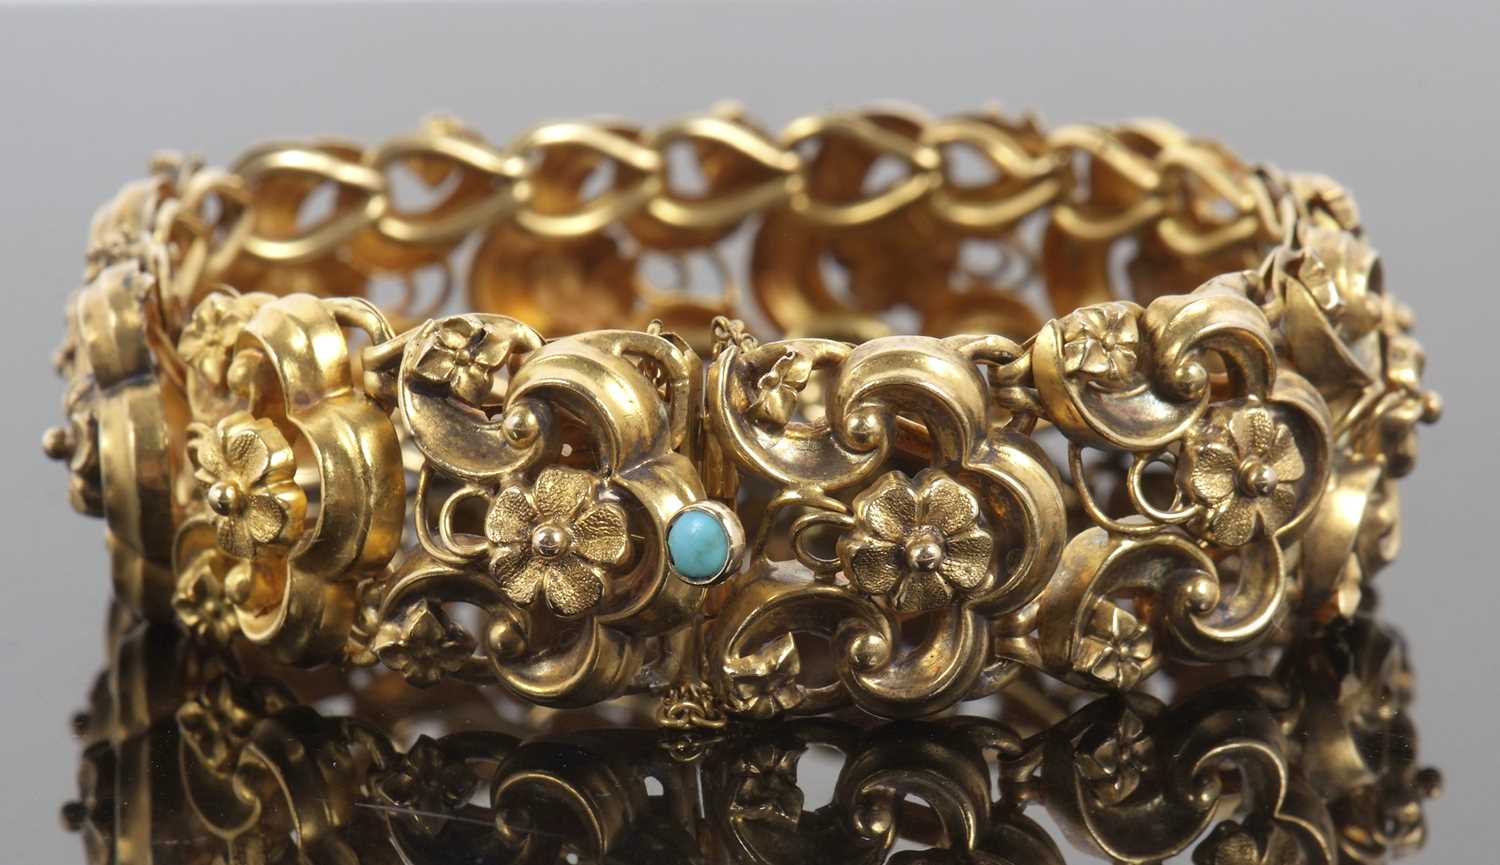 A 19th century bracelet, the articulated repousse links with floral centres, with integrated clasp - Image 4 of 9